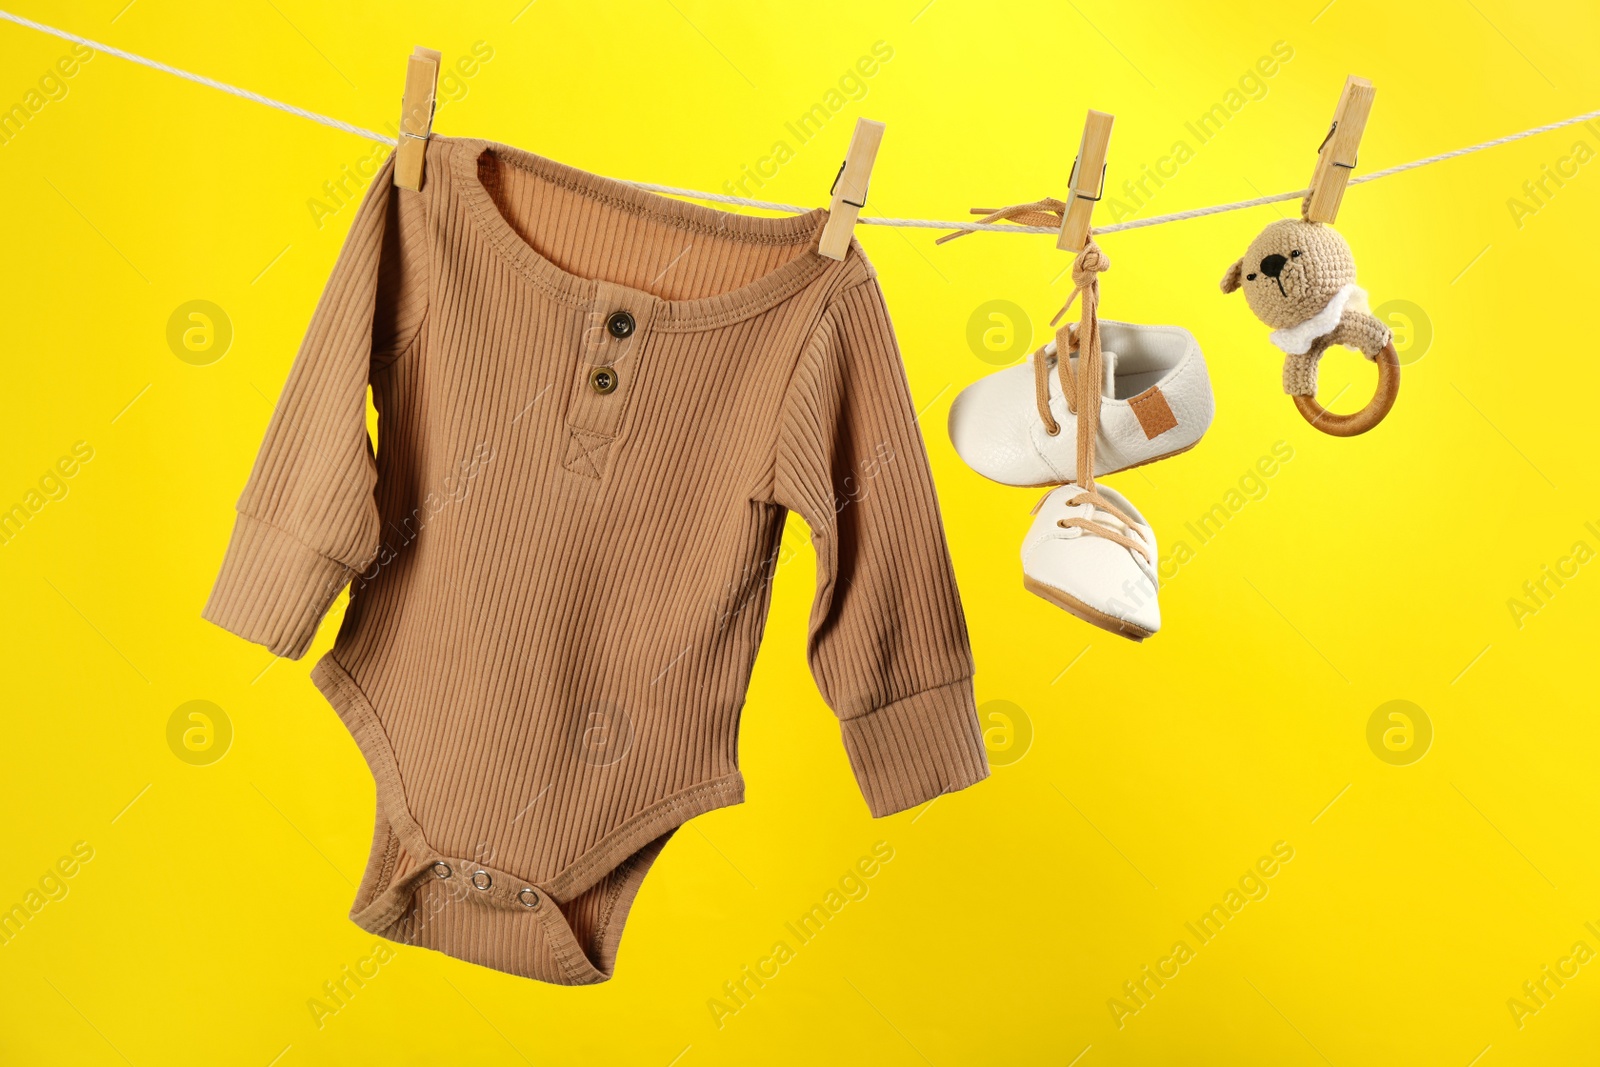 Photo of Baby clothes and accessories hanging on washing line against yellow background